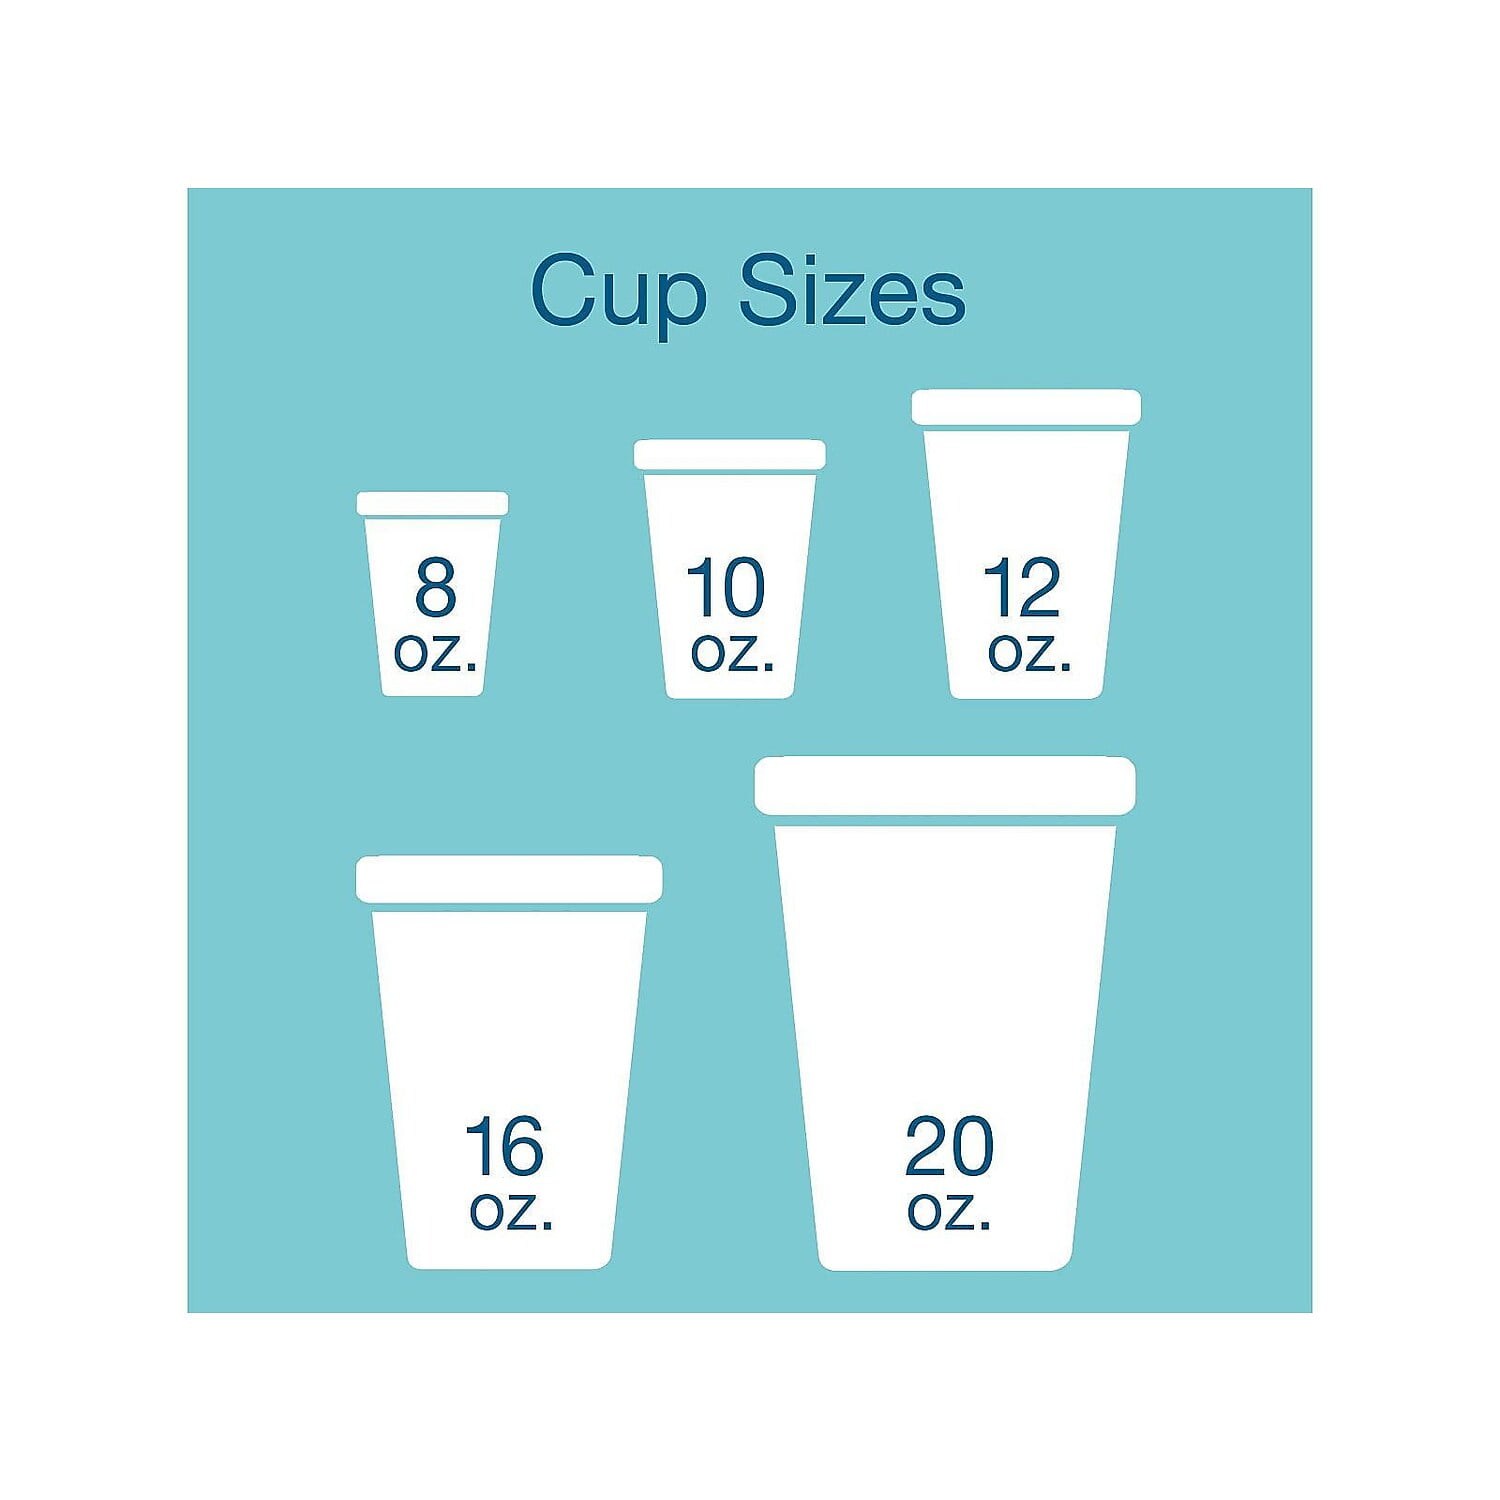 GREENER SETTINGS 16 oz. Clear Compostable Disposable Cups, Cold Drink Cups  [50-Pack] 50CPS16 - The Home Depot